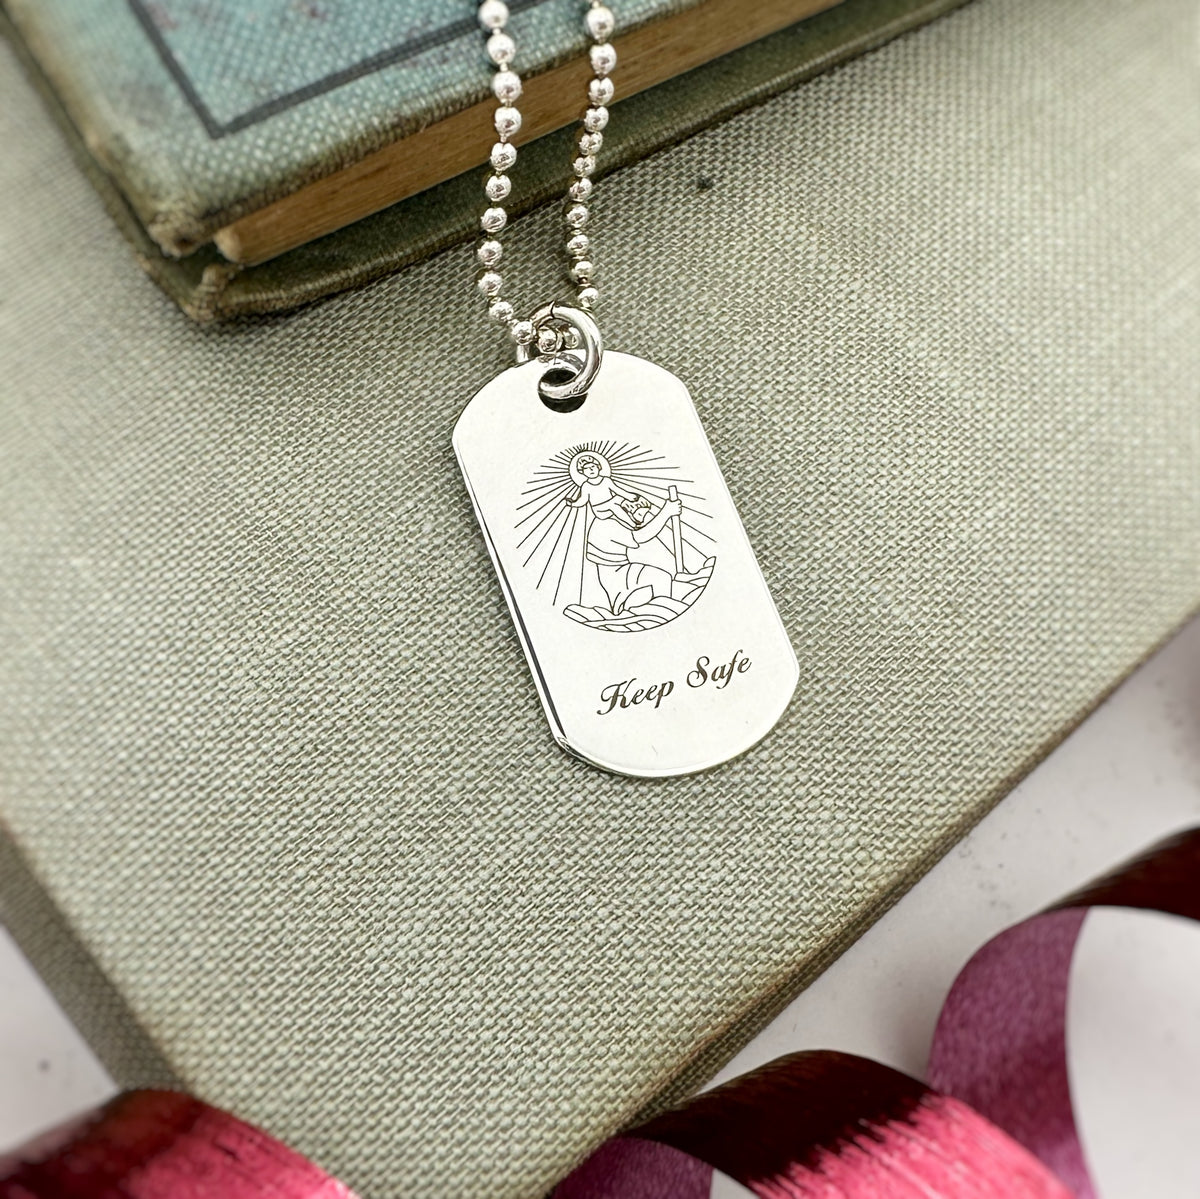 thin solid silver dog tag Saint Christopher necklace keep safe engraving 